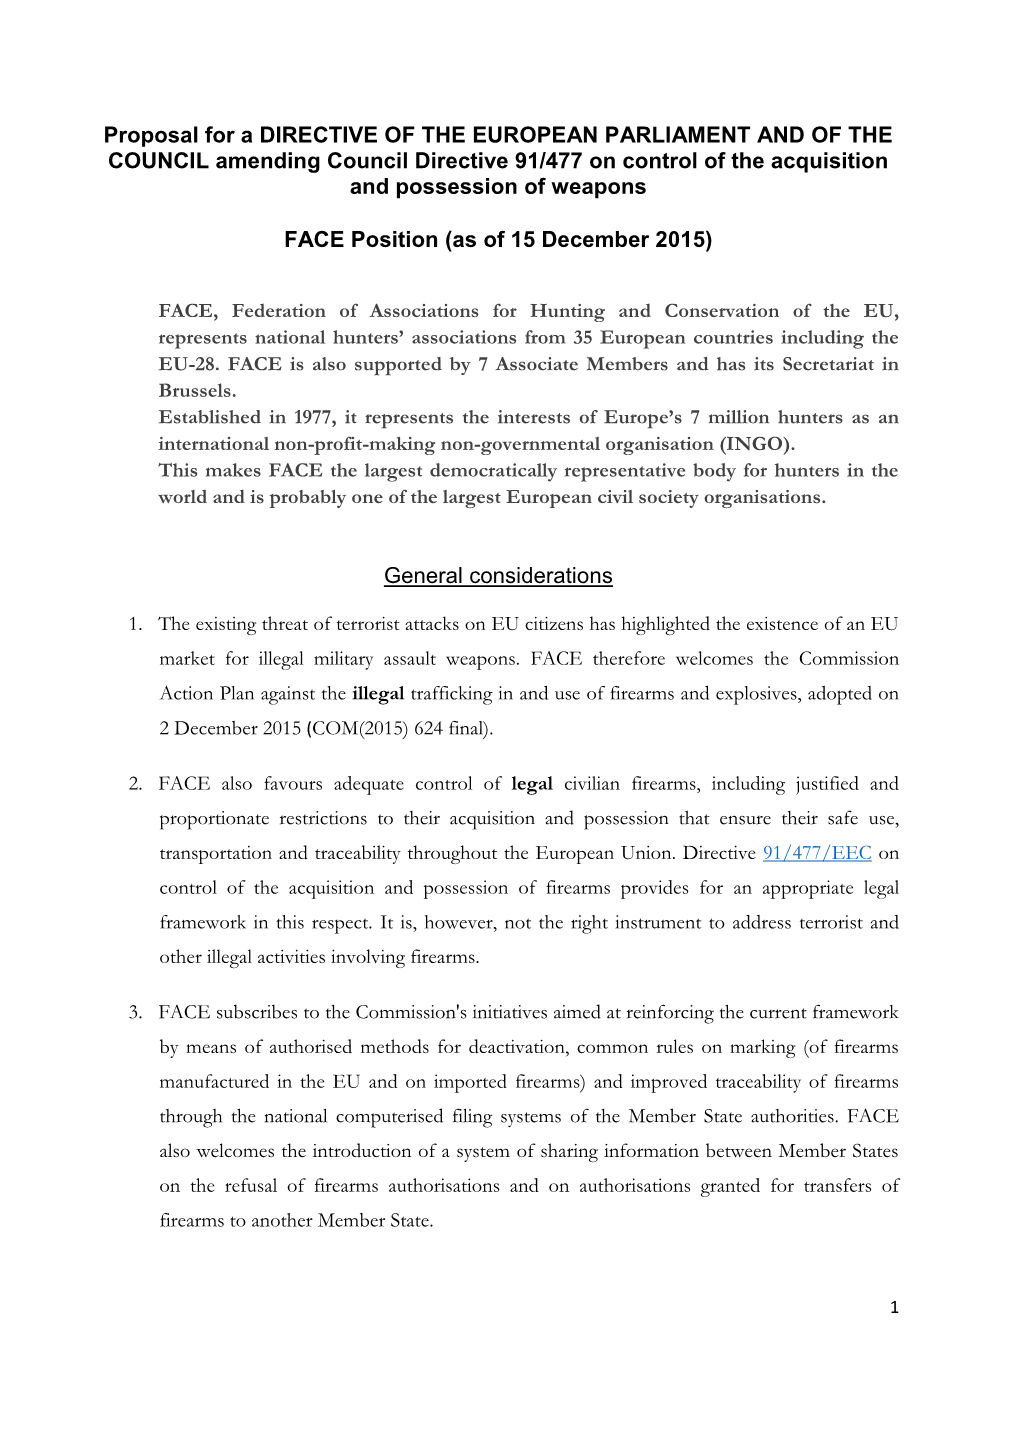 FACE Position with AM on Firearms Directive 15 Dec2015